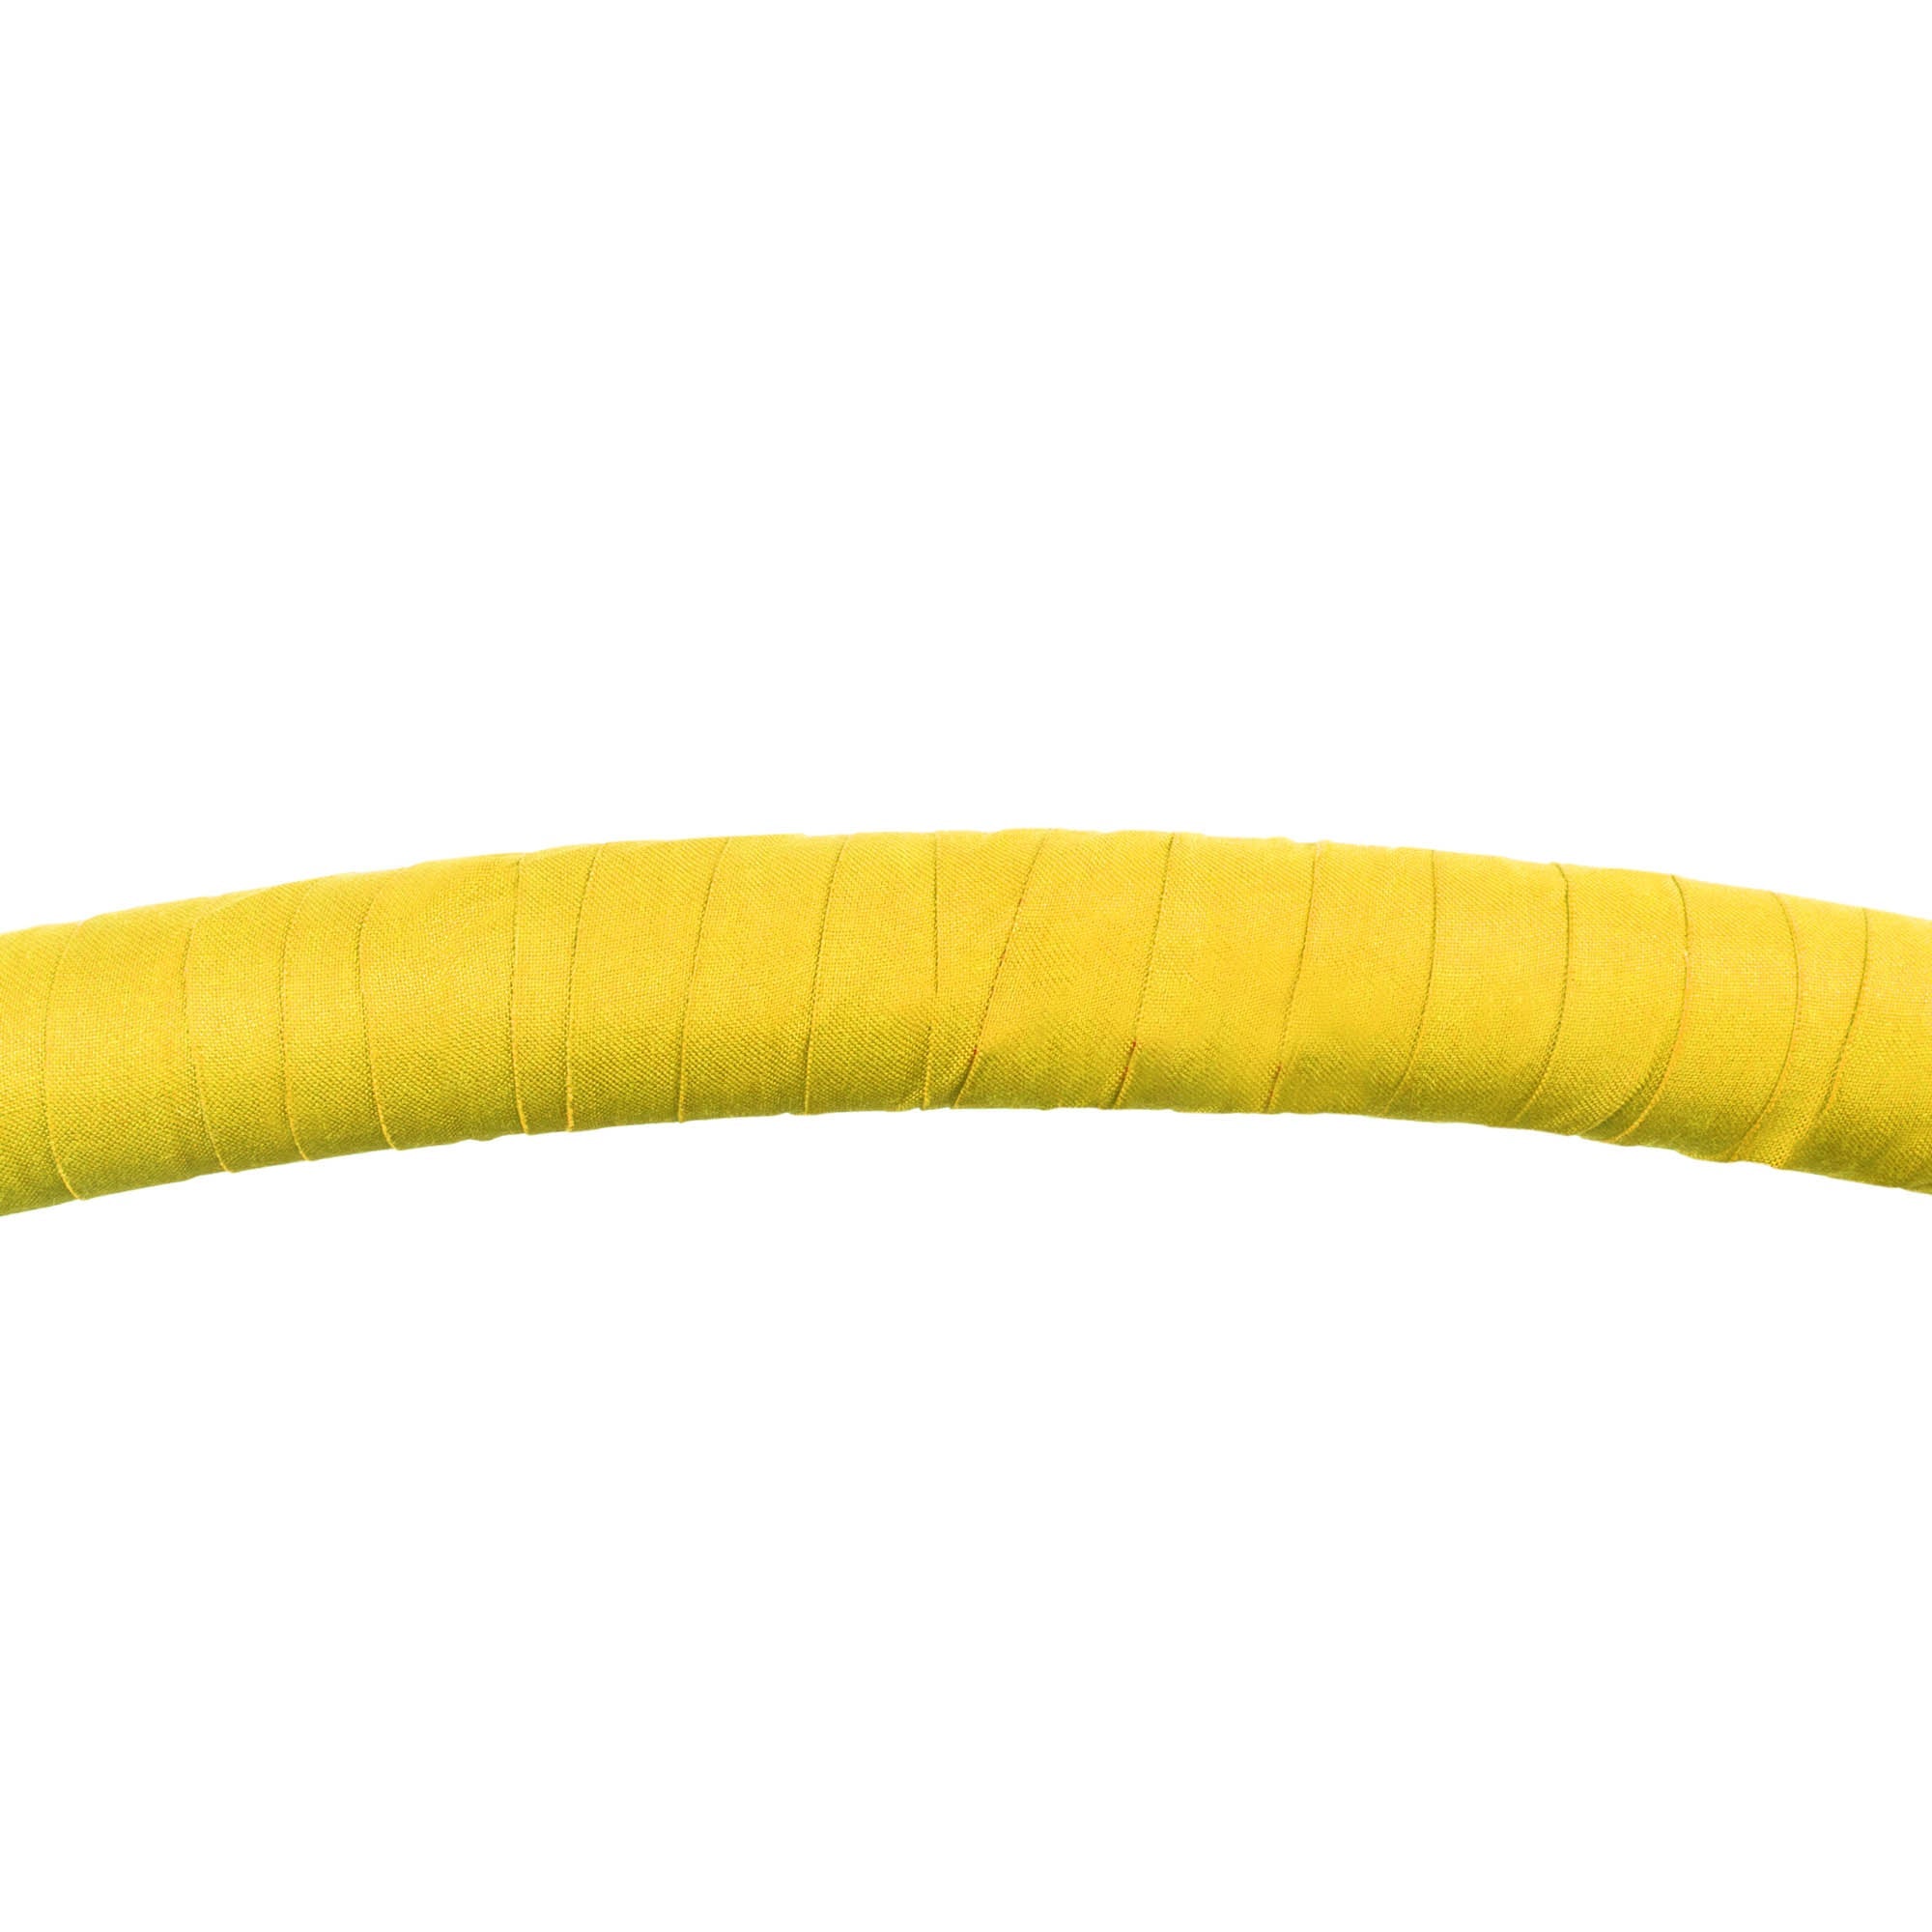 hoop taped with yellow 3.8cm